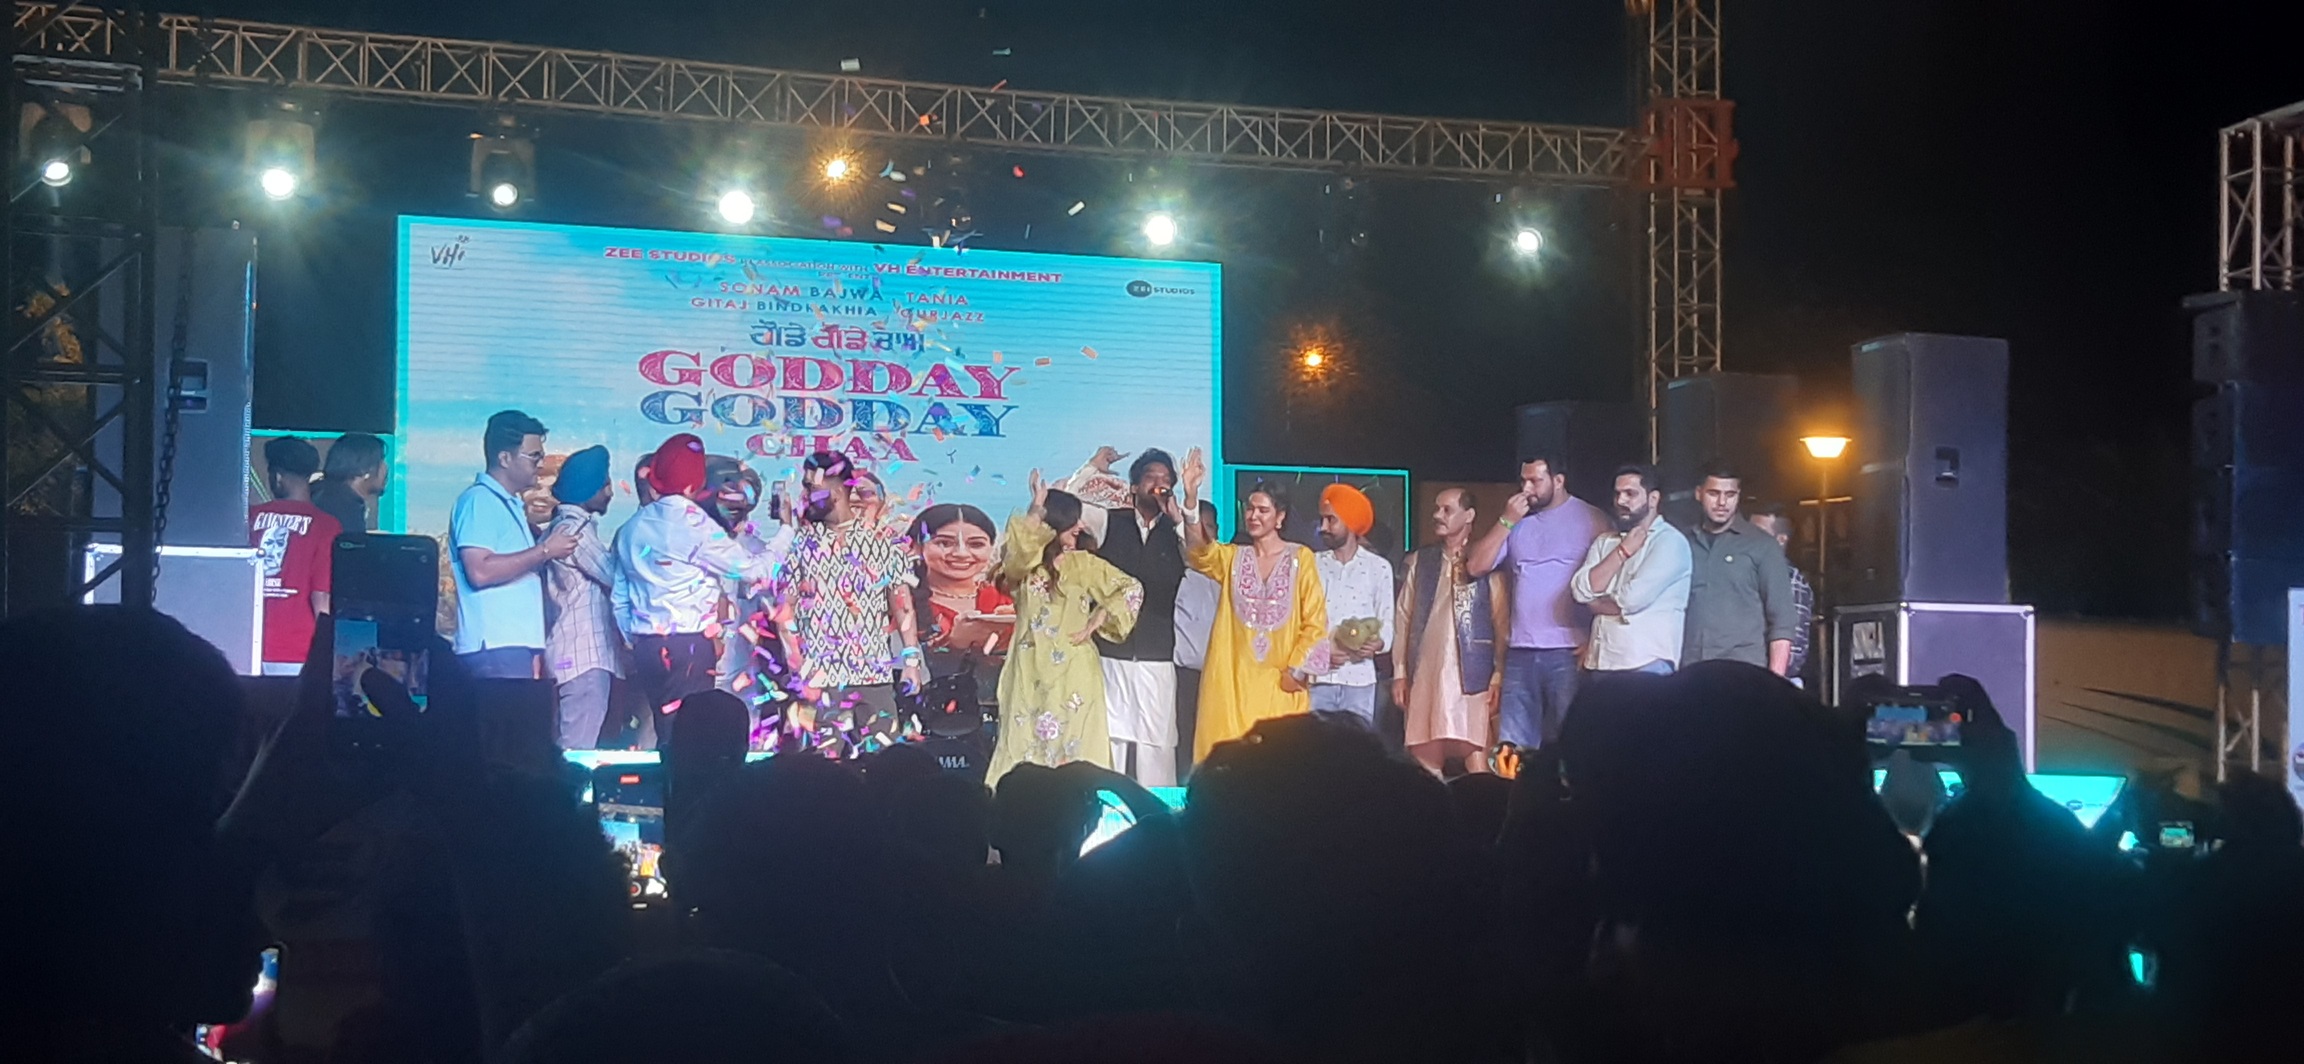 The star cast of Godday Godday Chaa turned up the FUN at VR Punjab